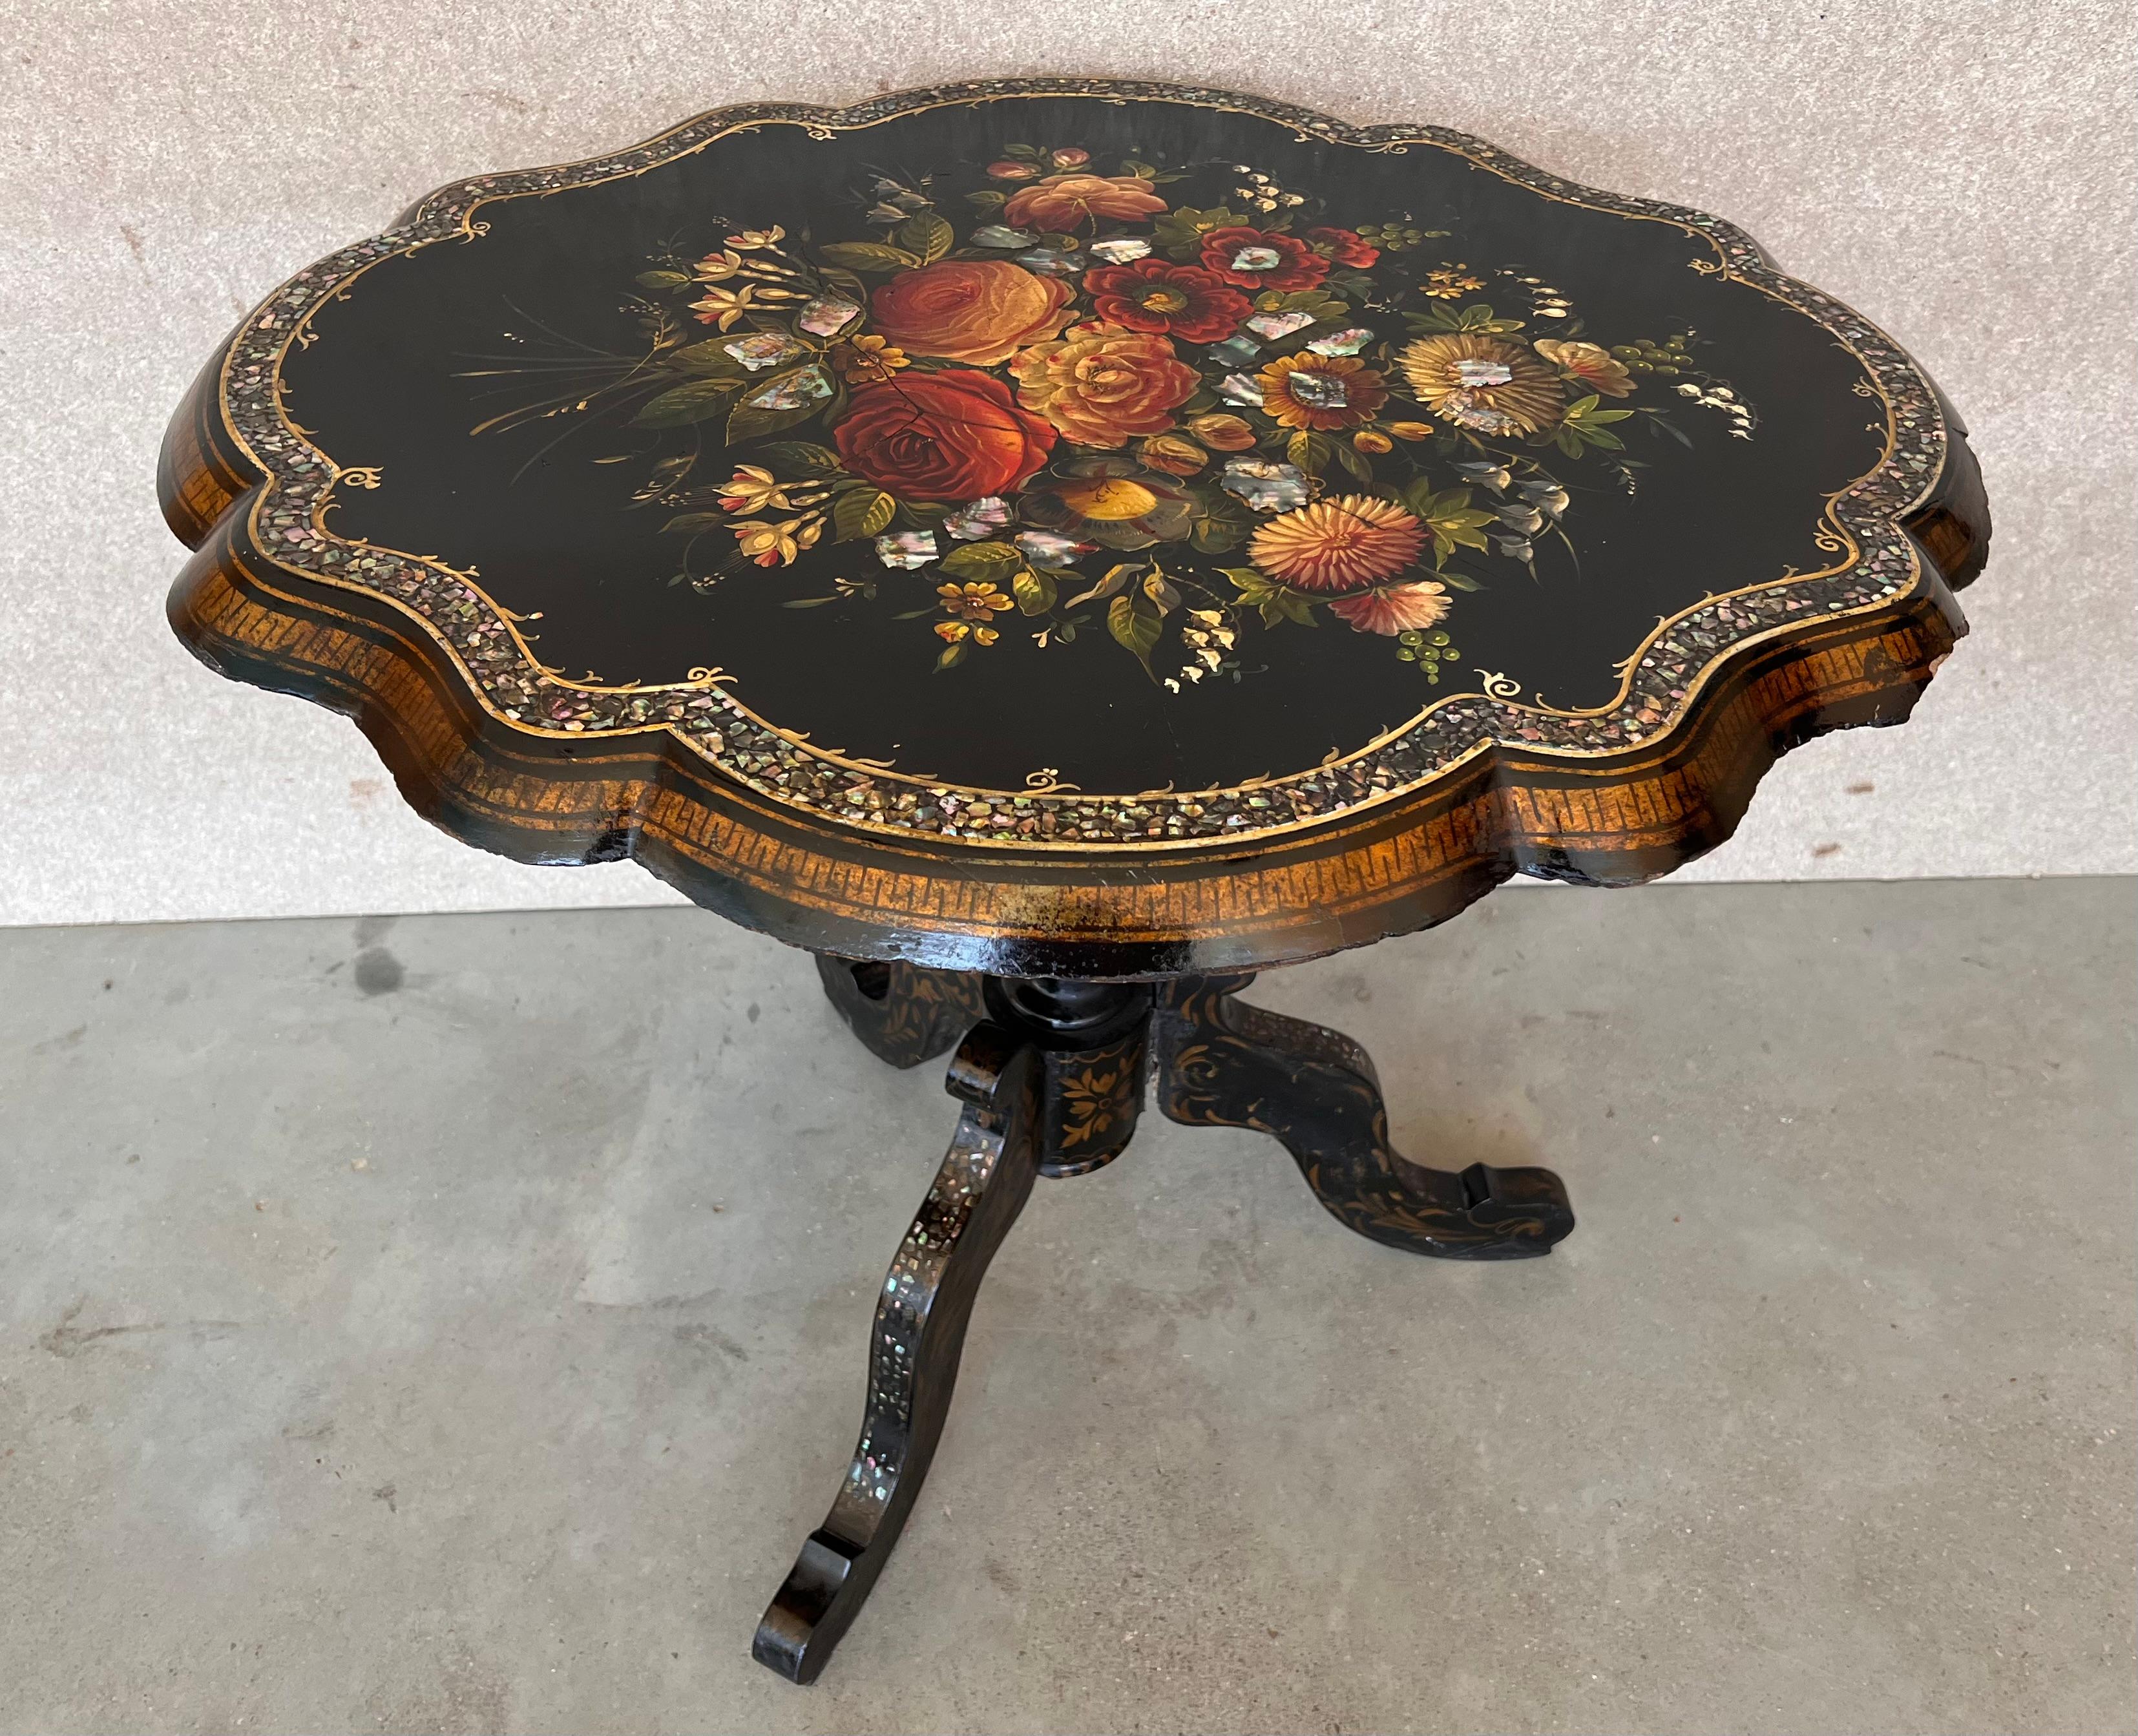 An antique English lacquer Papier Mâché tilt top occasional table, hand painted with floral motifs and inlaid with mother-of-pearl. The scalloped top and base made of paper-mache, that was fashion during the Victorian period. The spine is made of